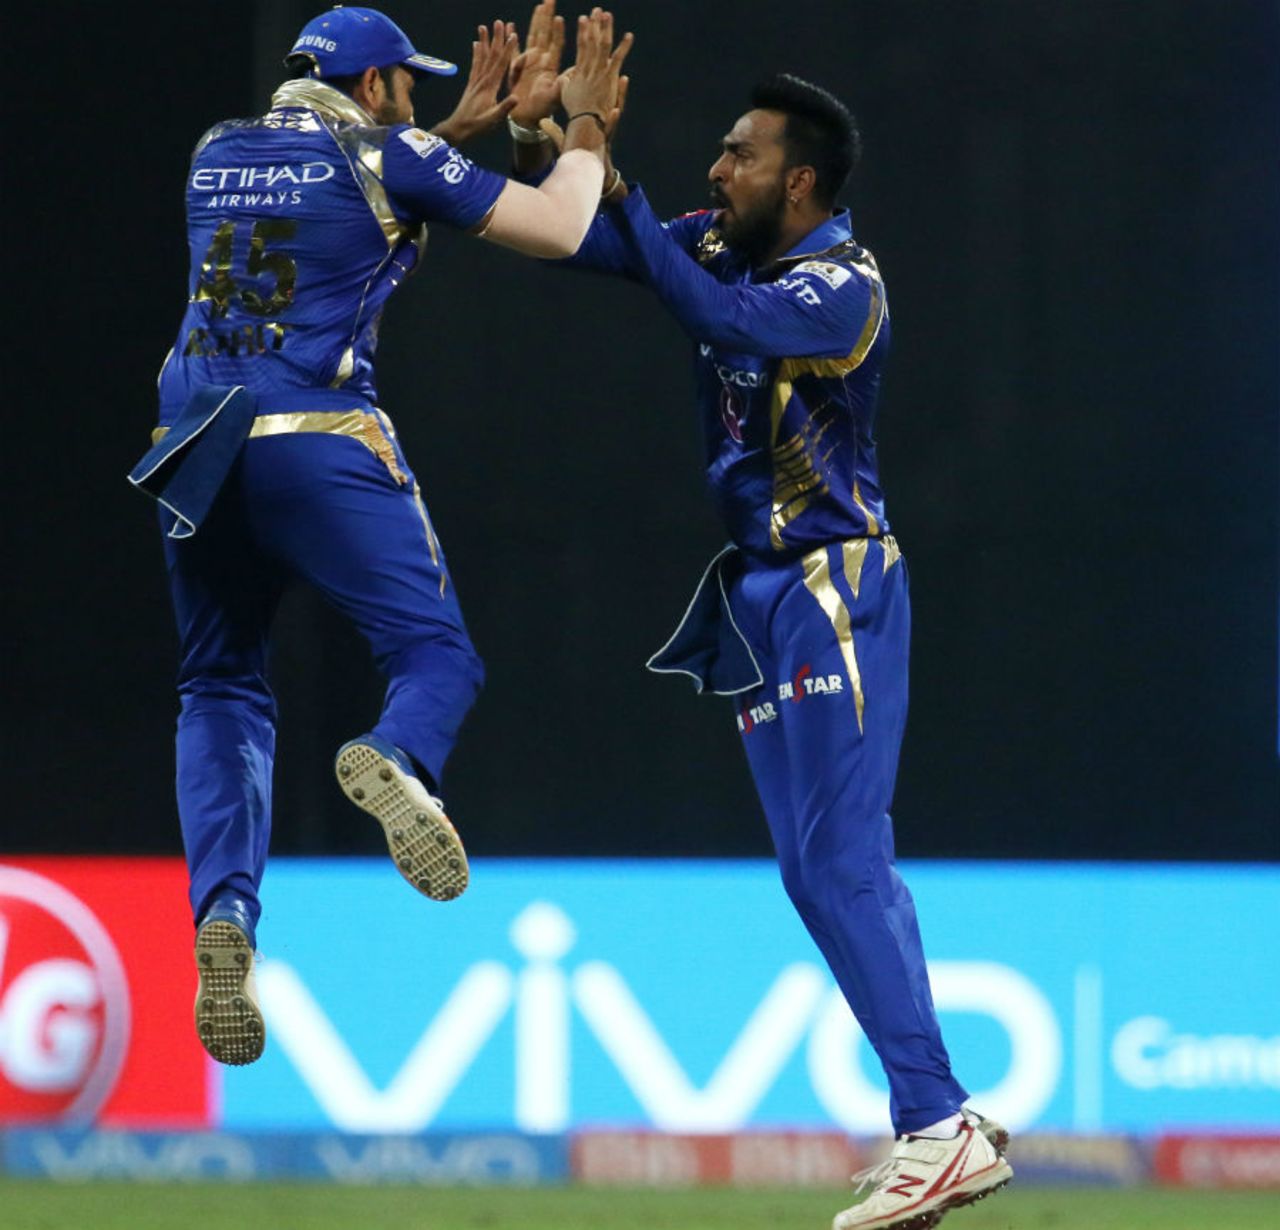 Rohit Sharma and Krunal Pandya are ecstatic after getting two wickets in the same over, Mumbai Indians v Kolkata Knight Riders, Mumbai, IPL, April 9, 2017